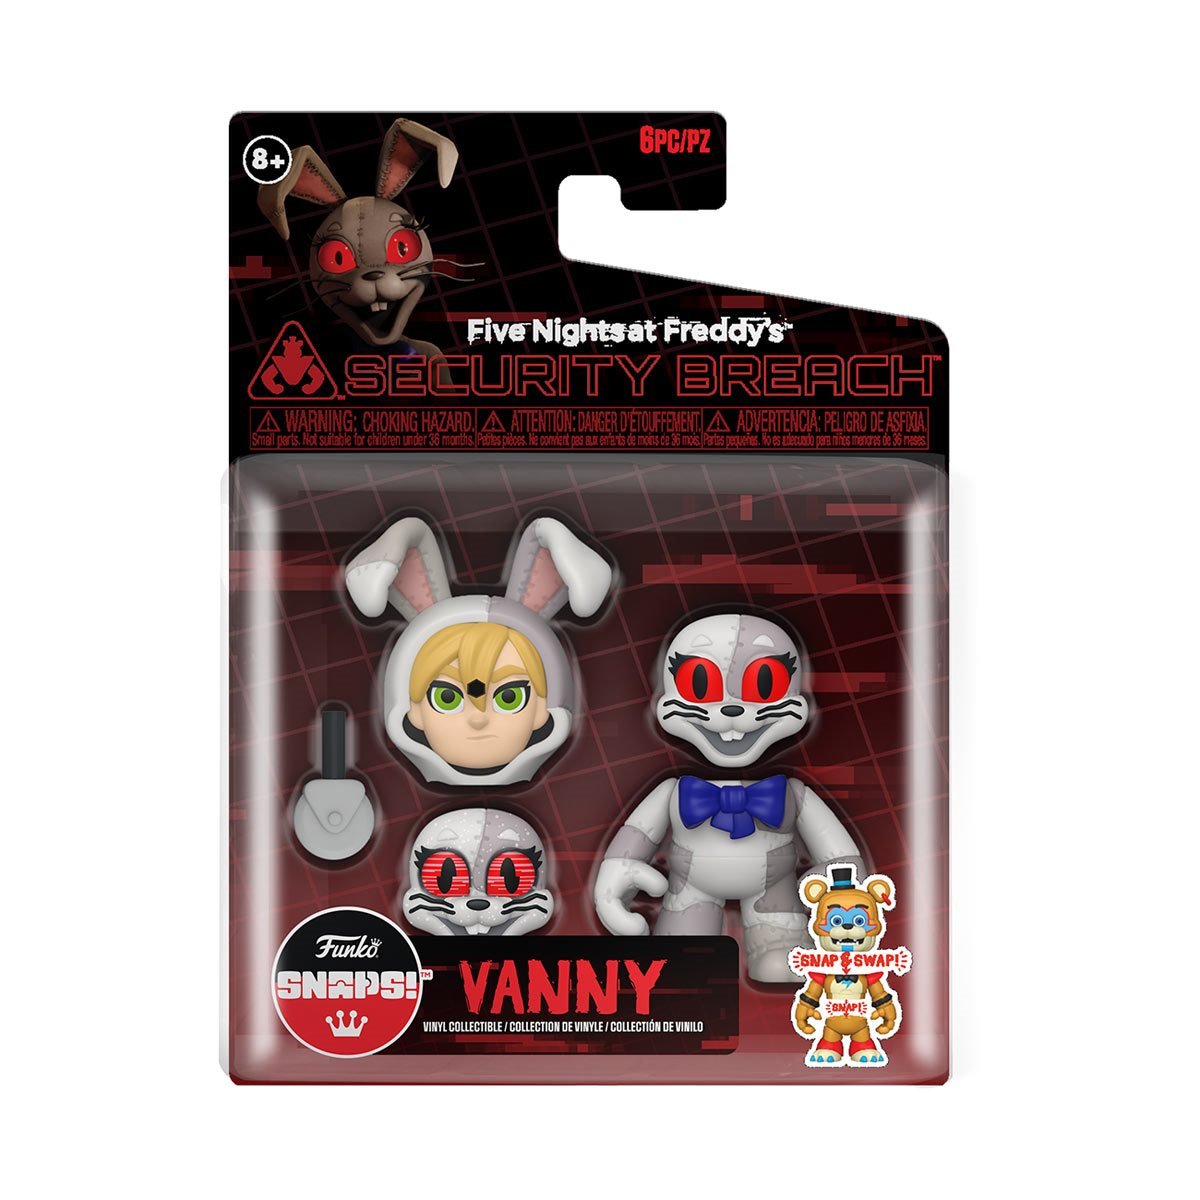 Five Nights At Freddys Security Breach Vanny Snap Mini Figure